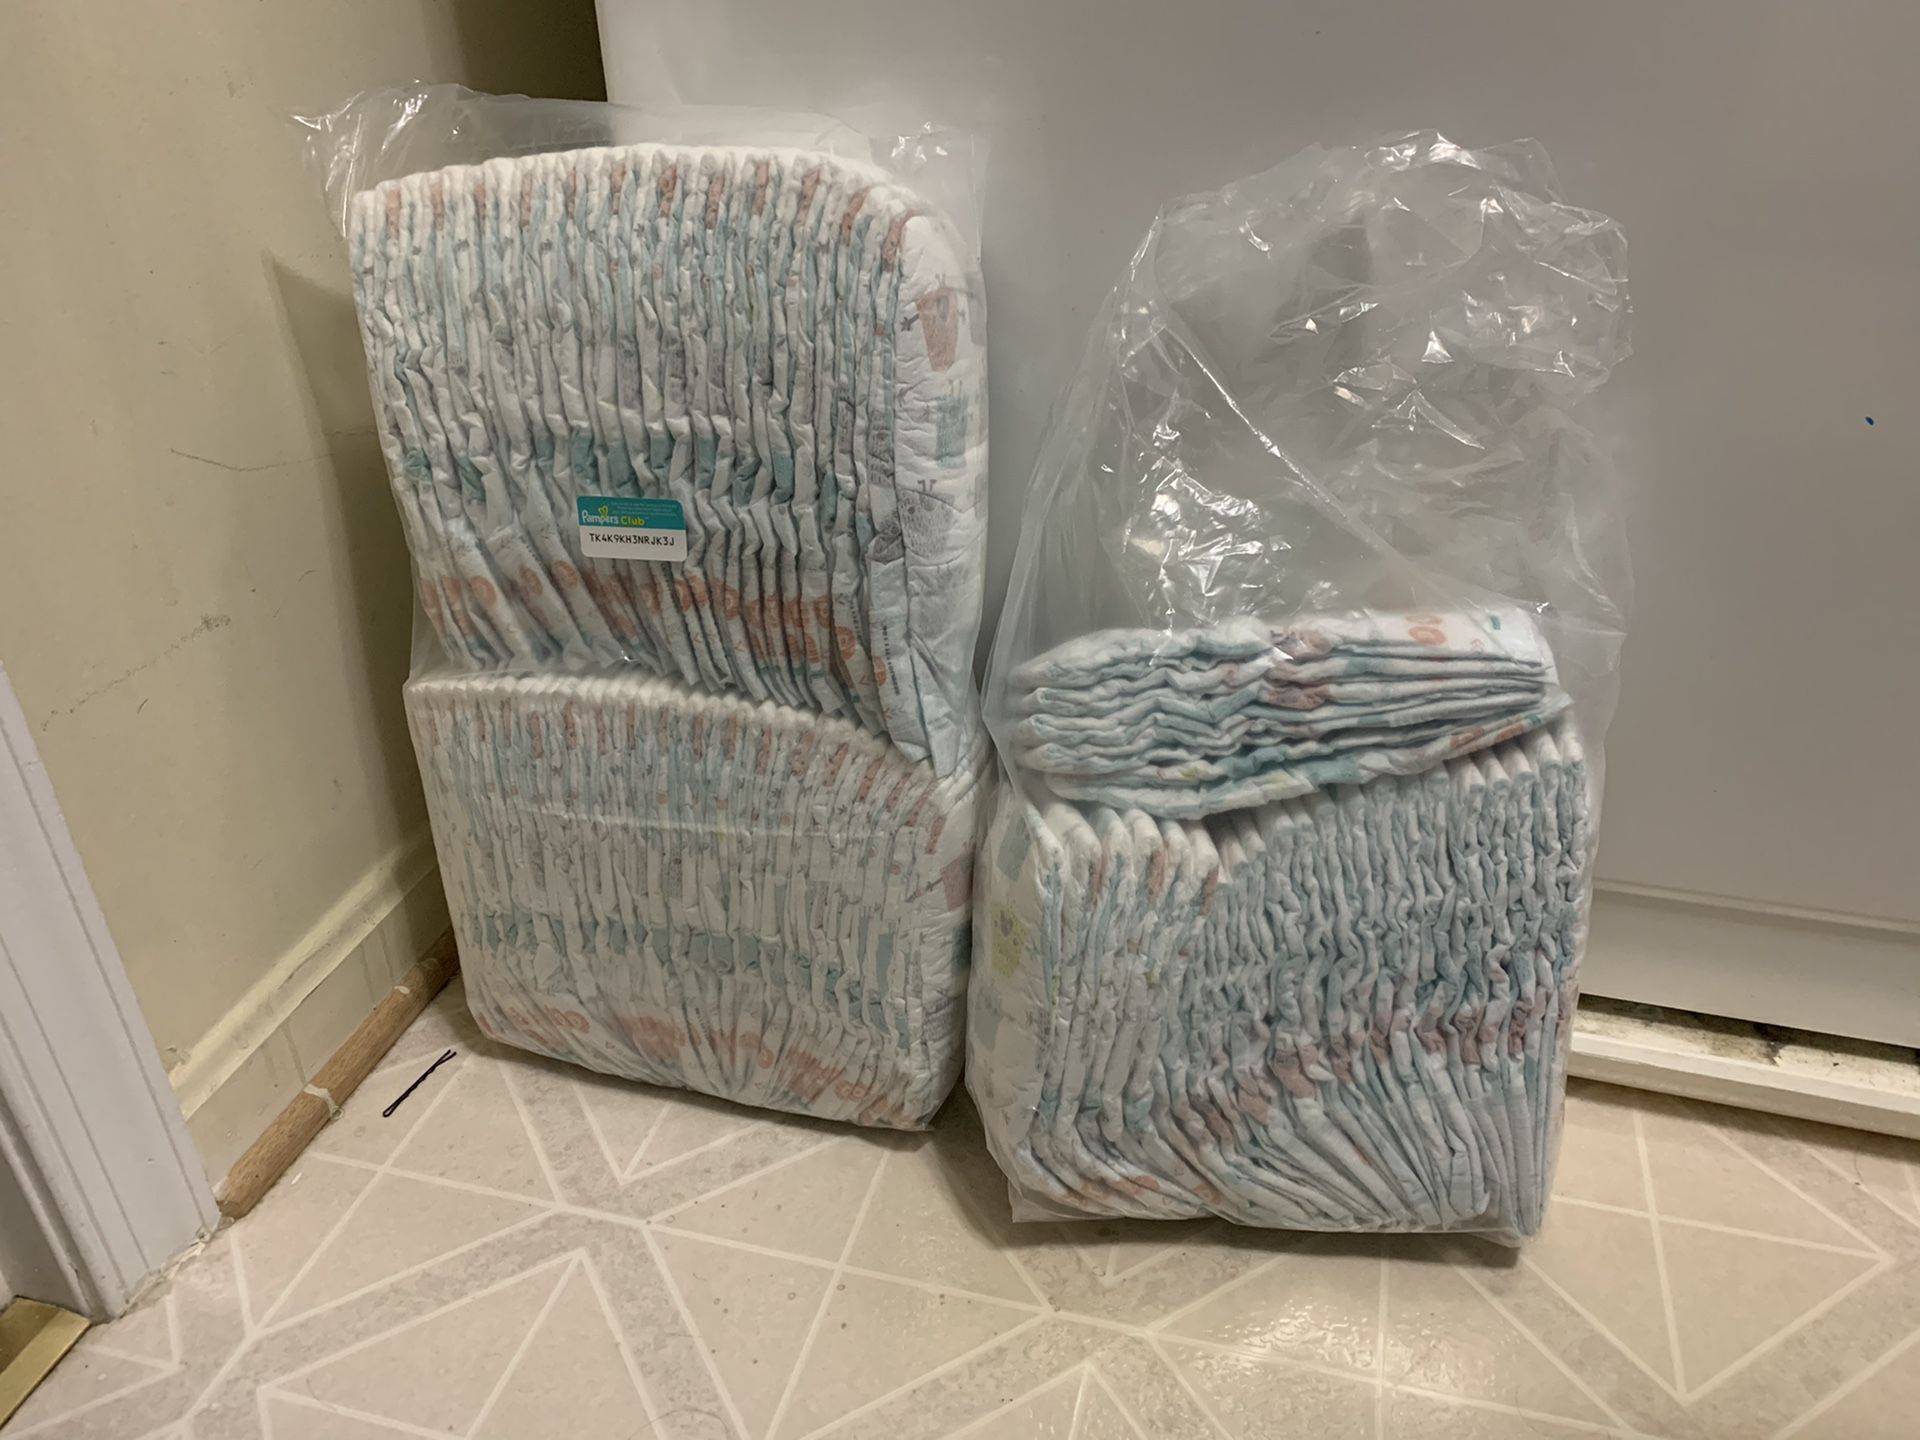 Pampers Brand size 4 Diapers